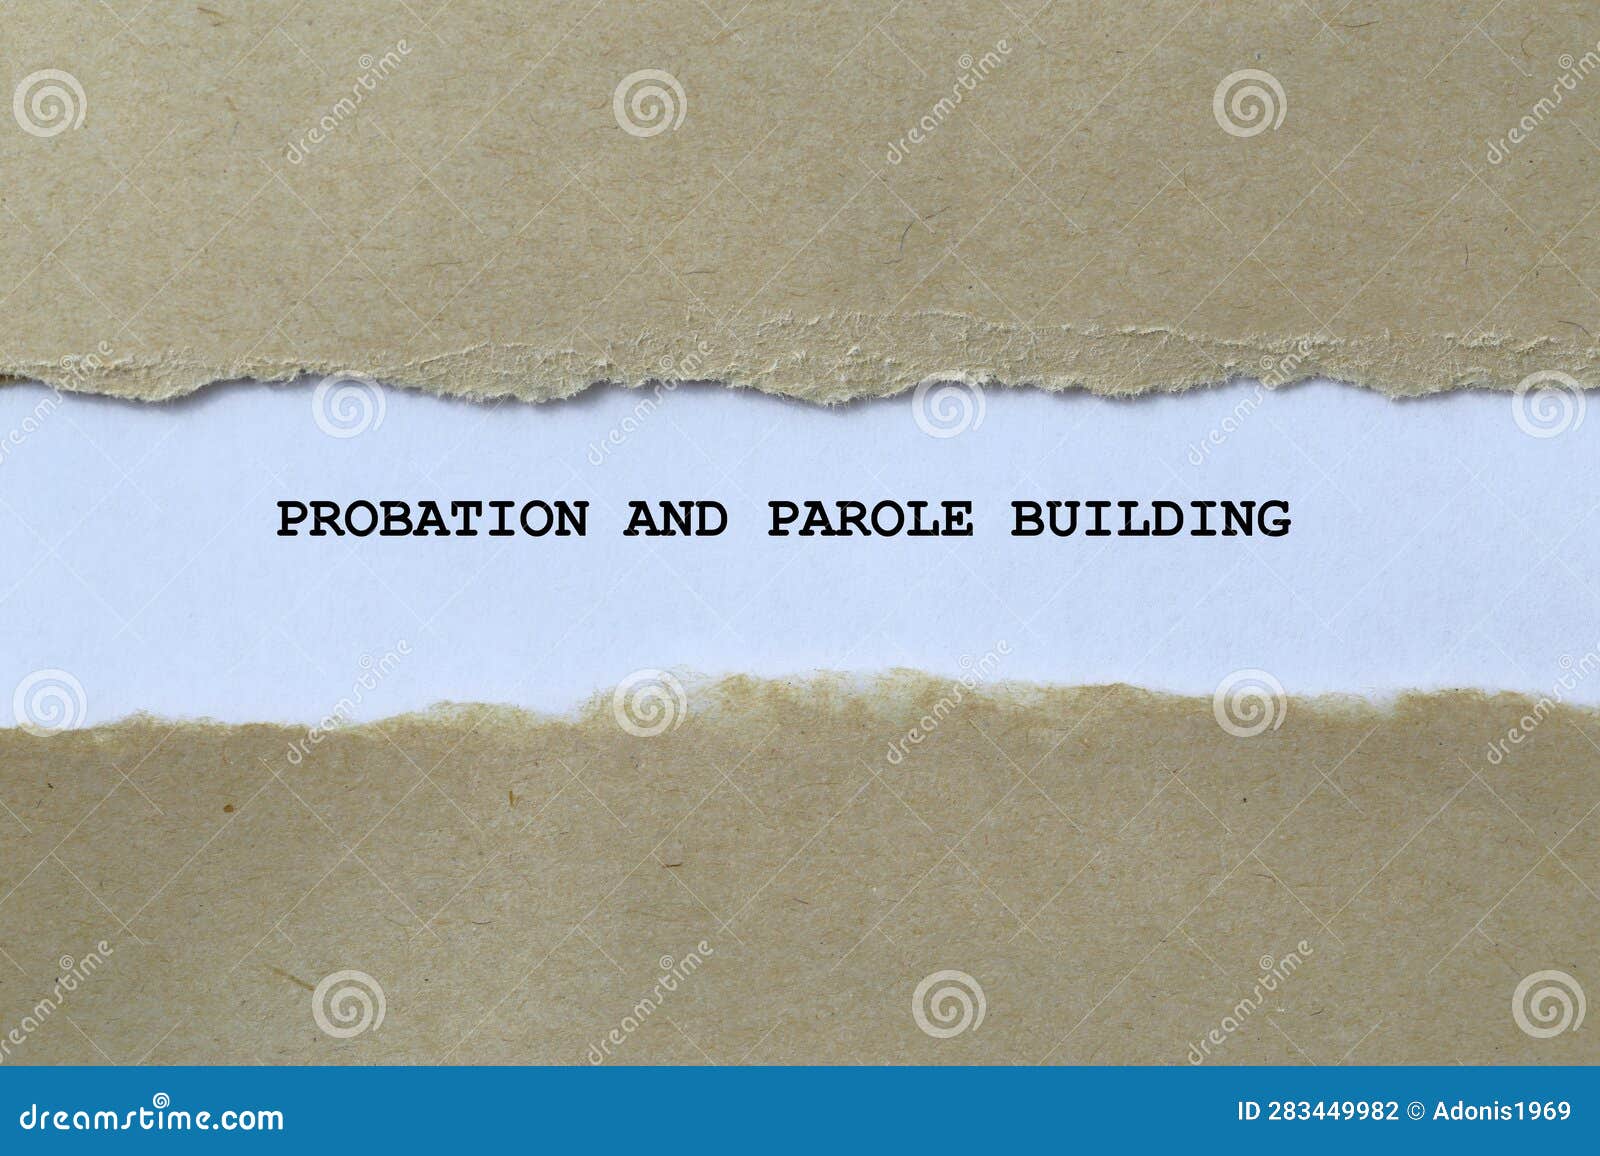 probation and parole building on white paper